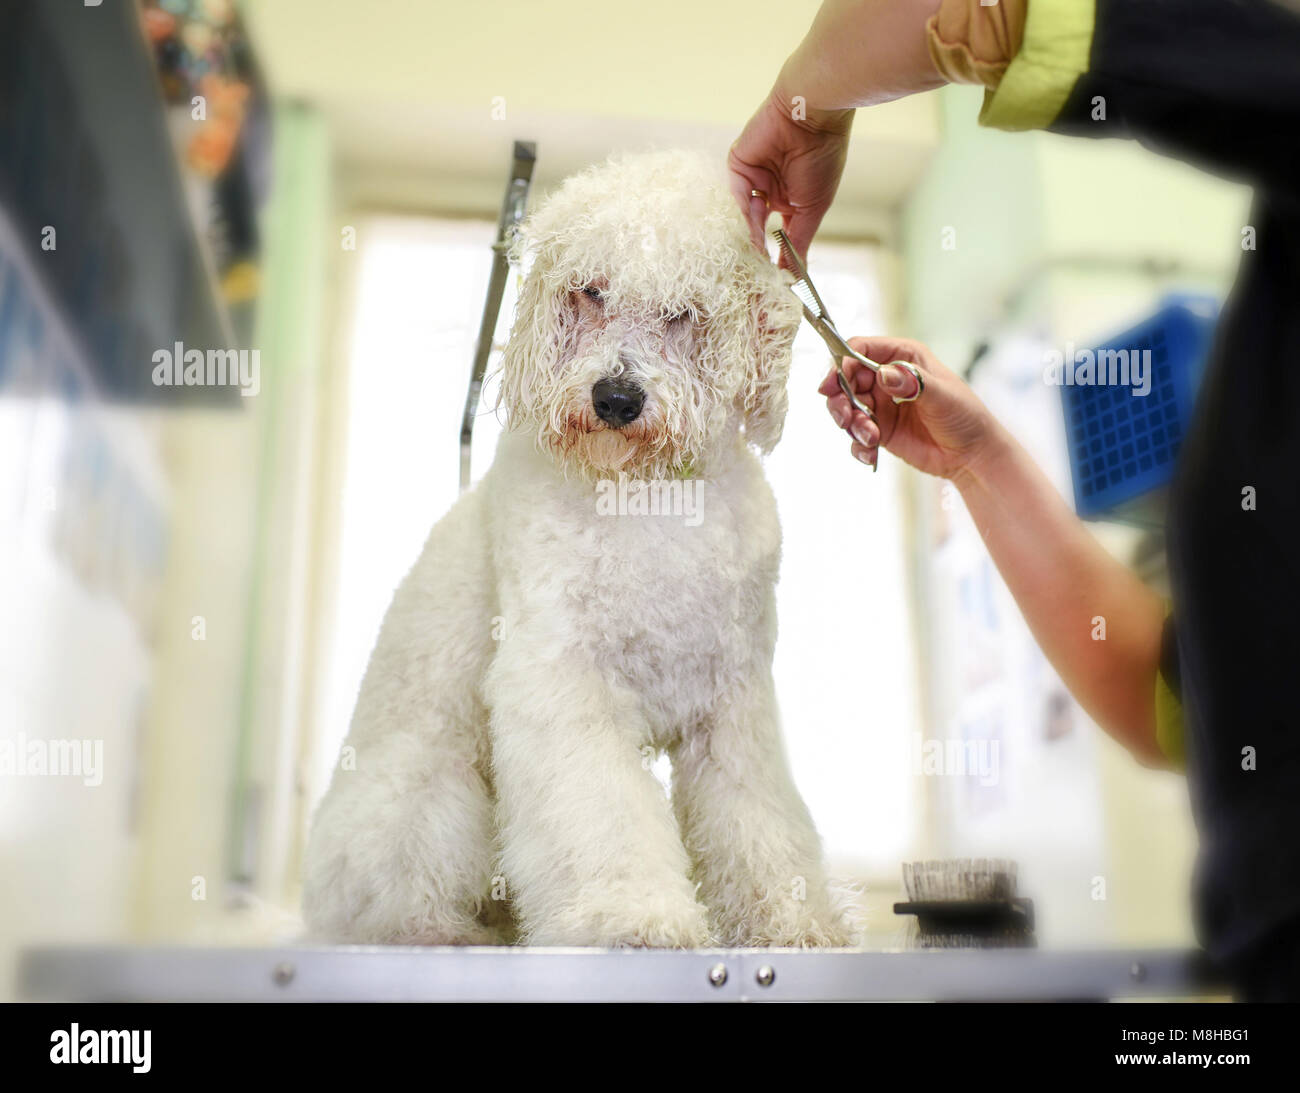 Groomer carefully trimming the long coat of a small white dog around the ears in a pet salon or grooming parlor as it sits on a workbench Stock Photo